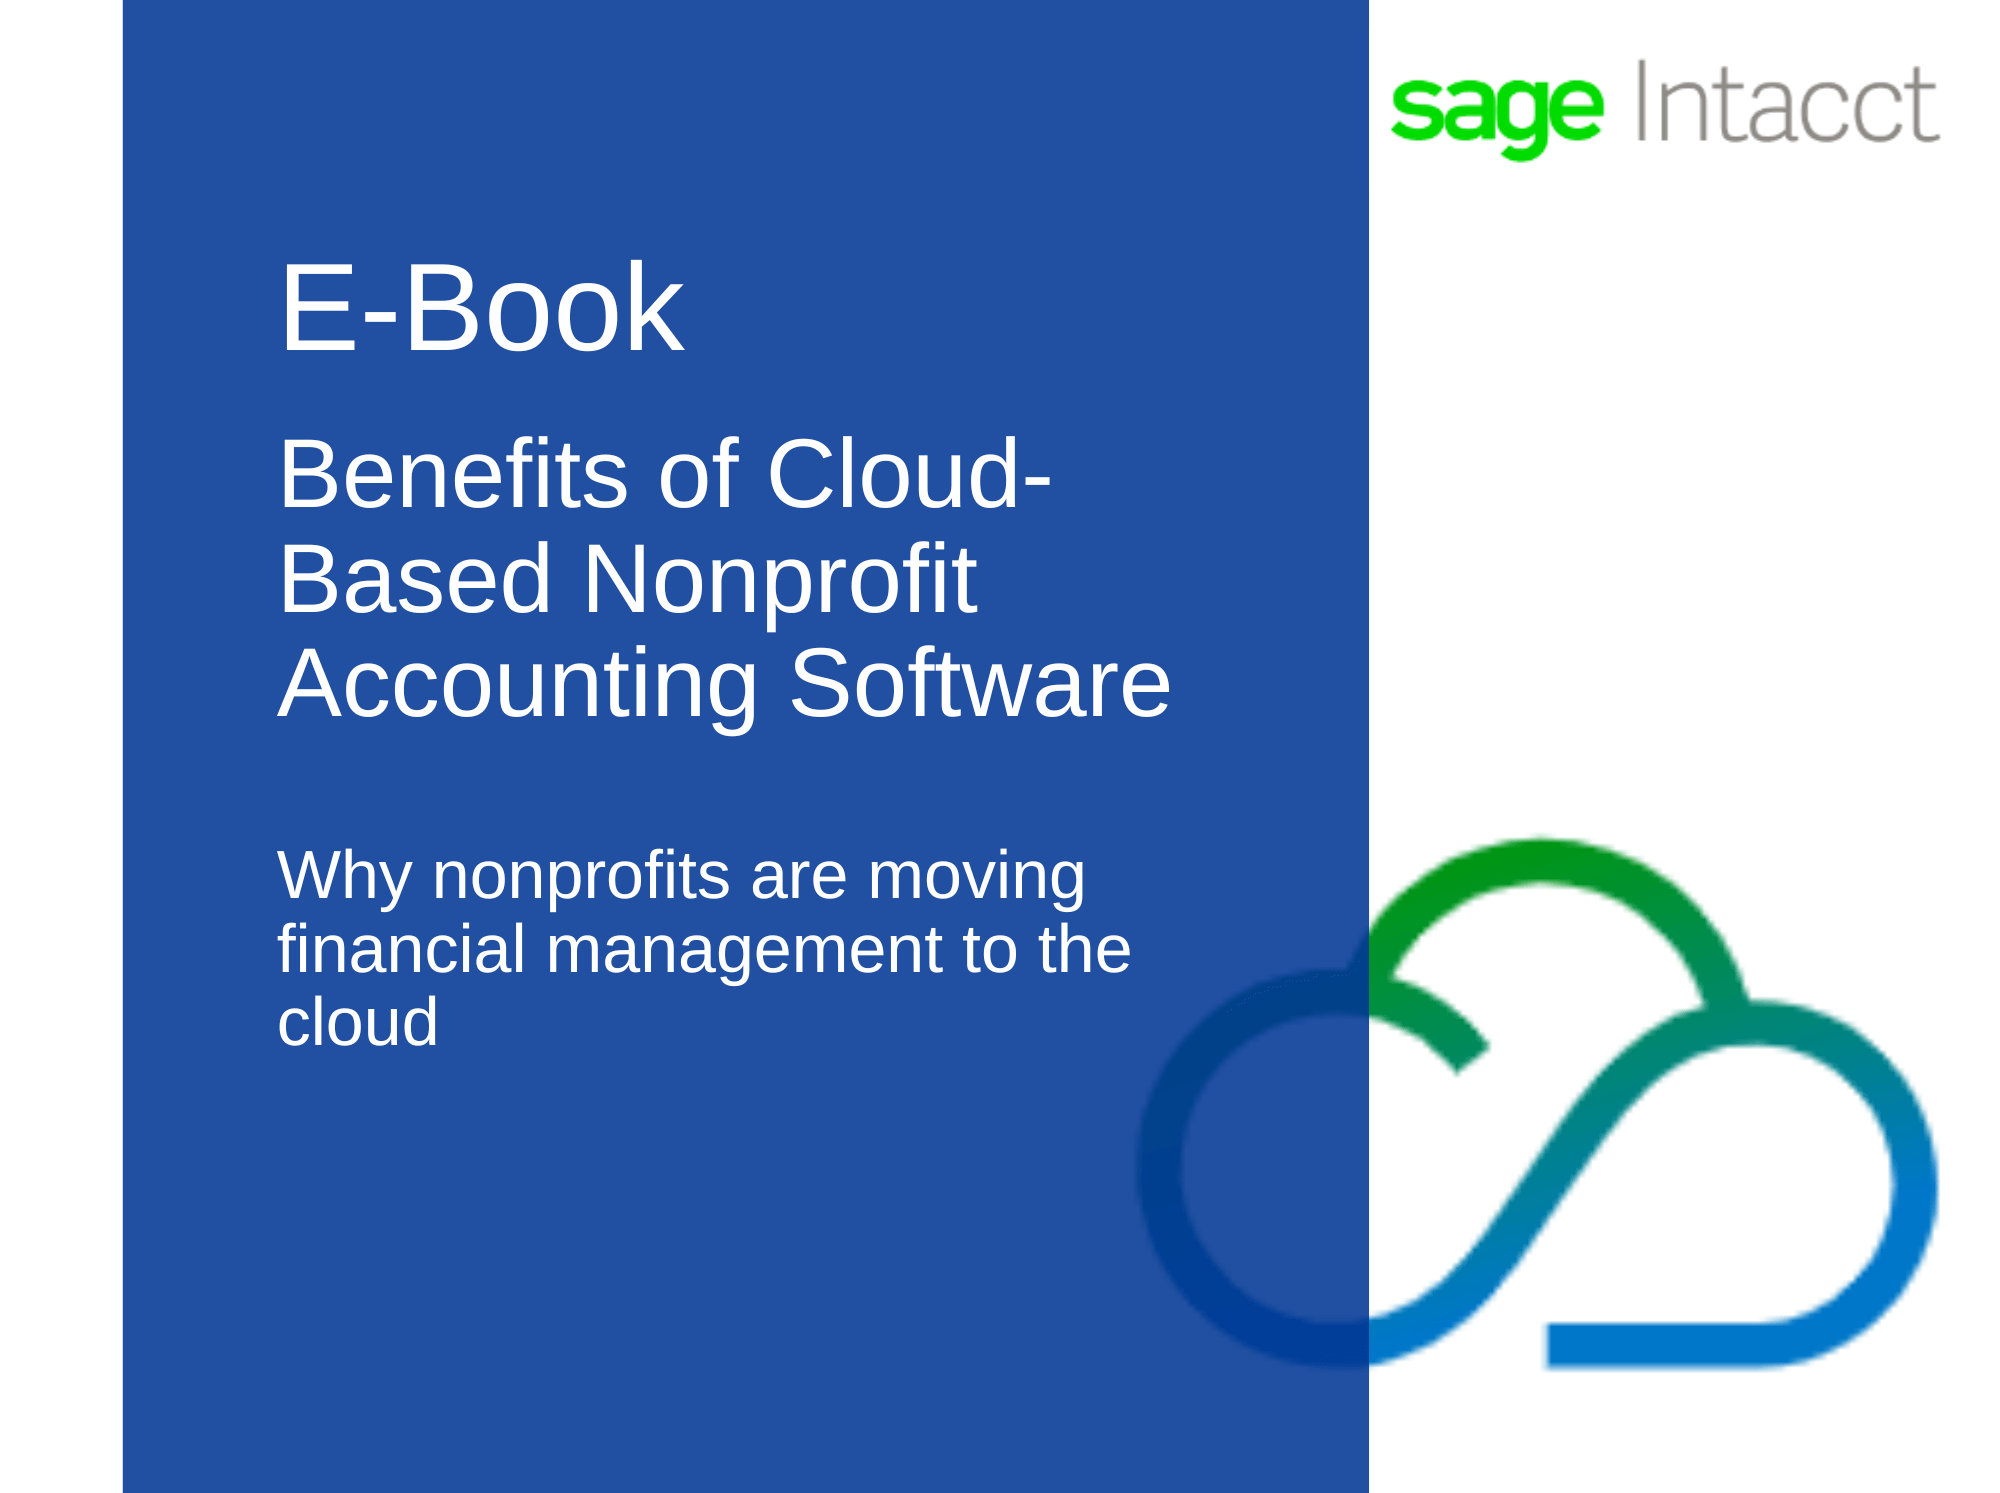 Sage Intacct E-Book: Benefits of Cloud-Based Nonprofit Accounting Software